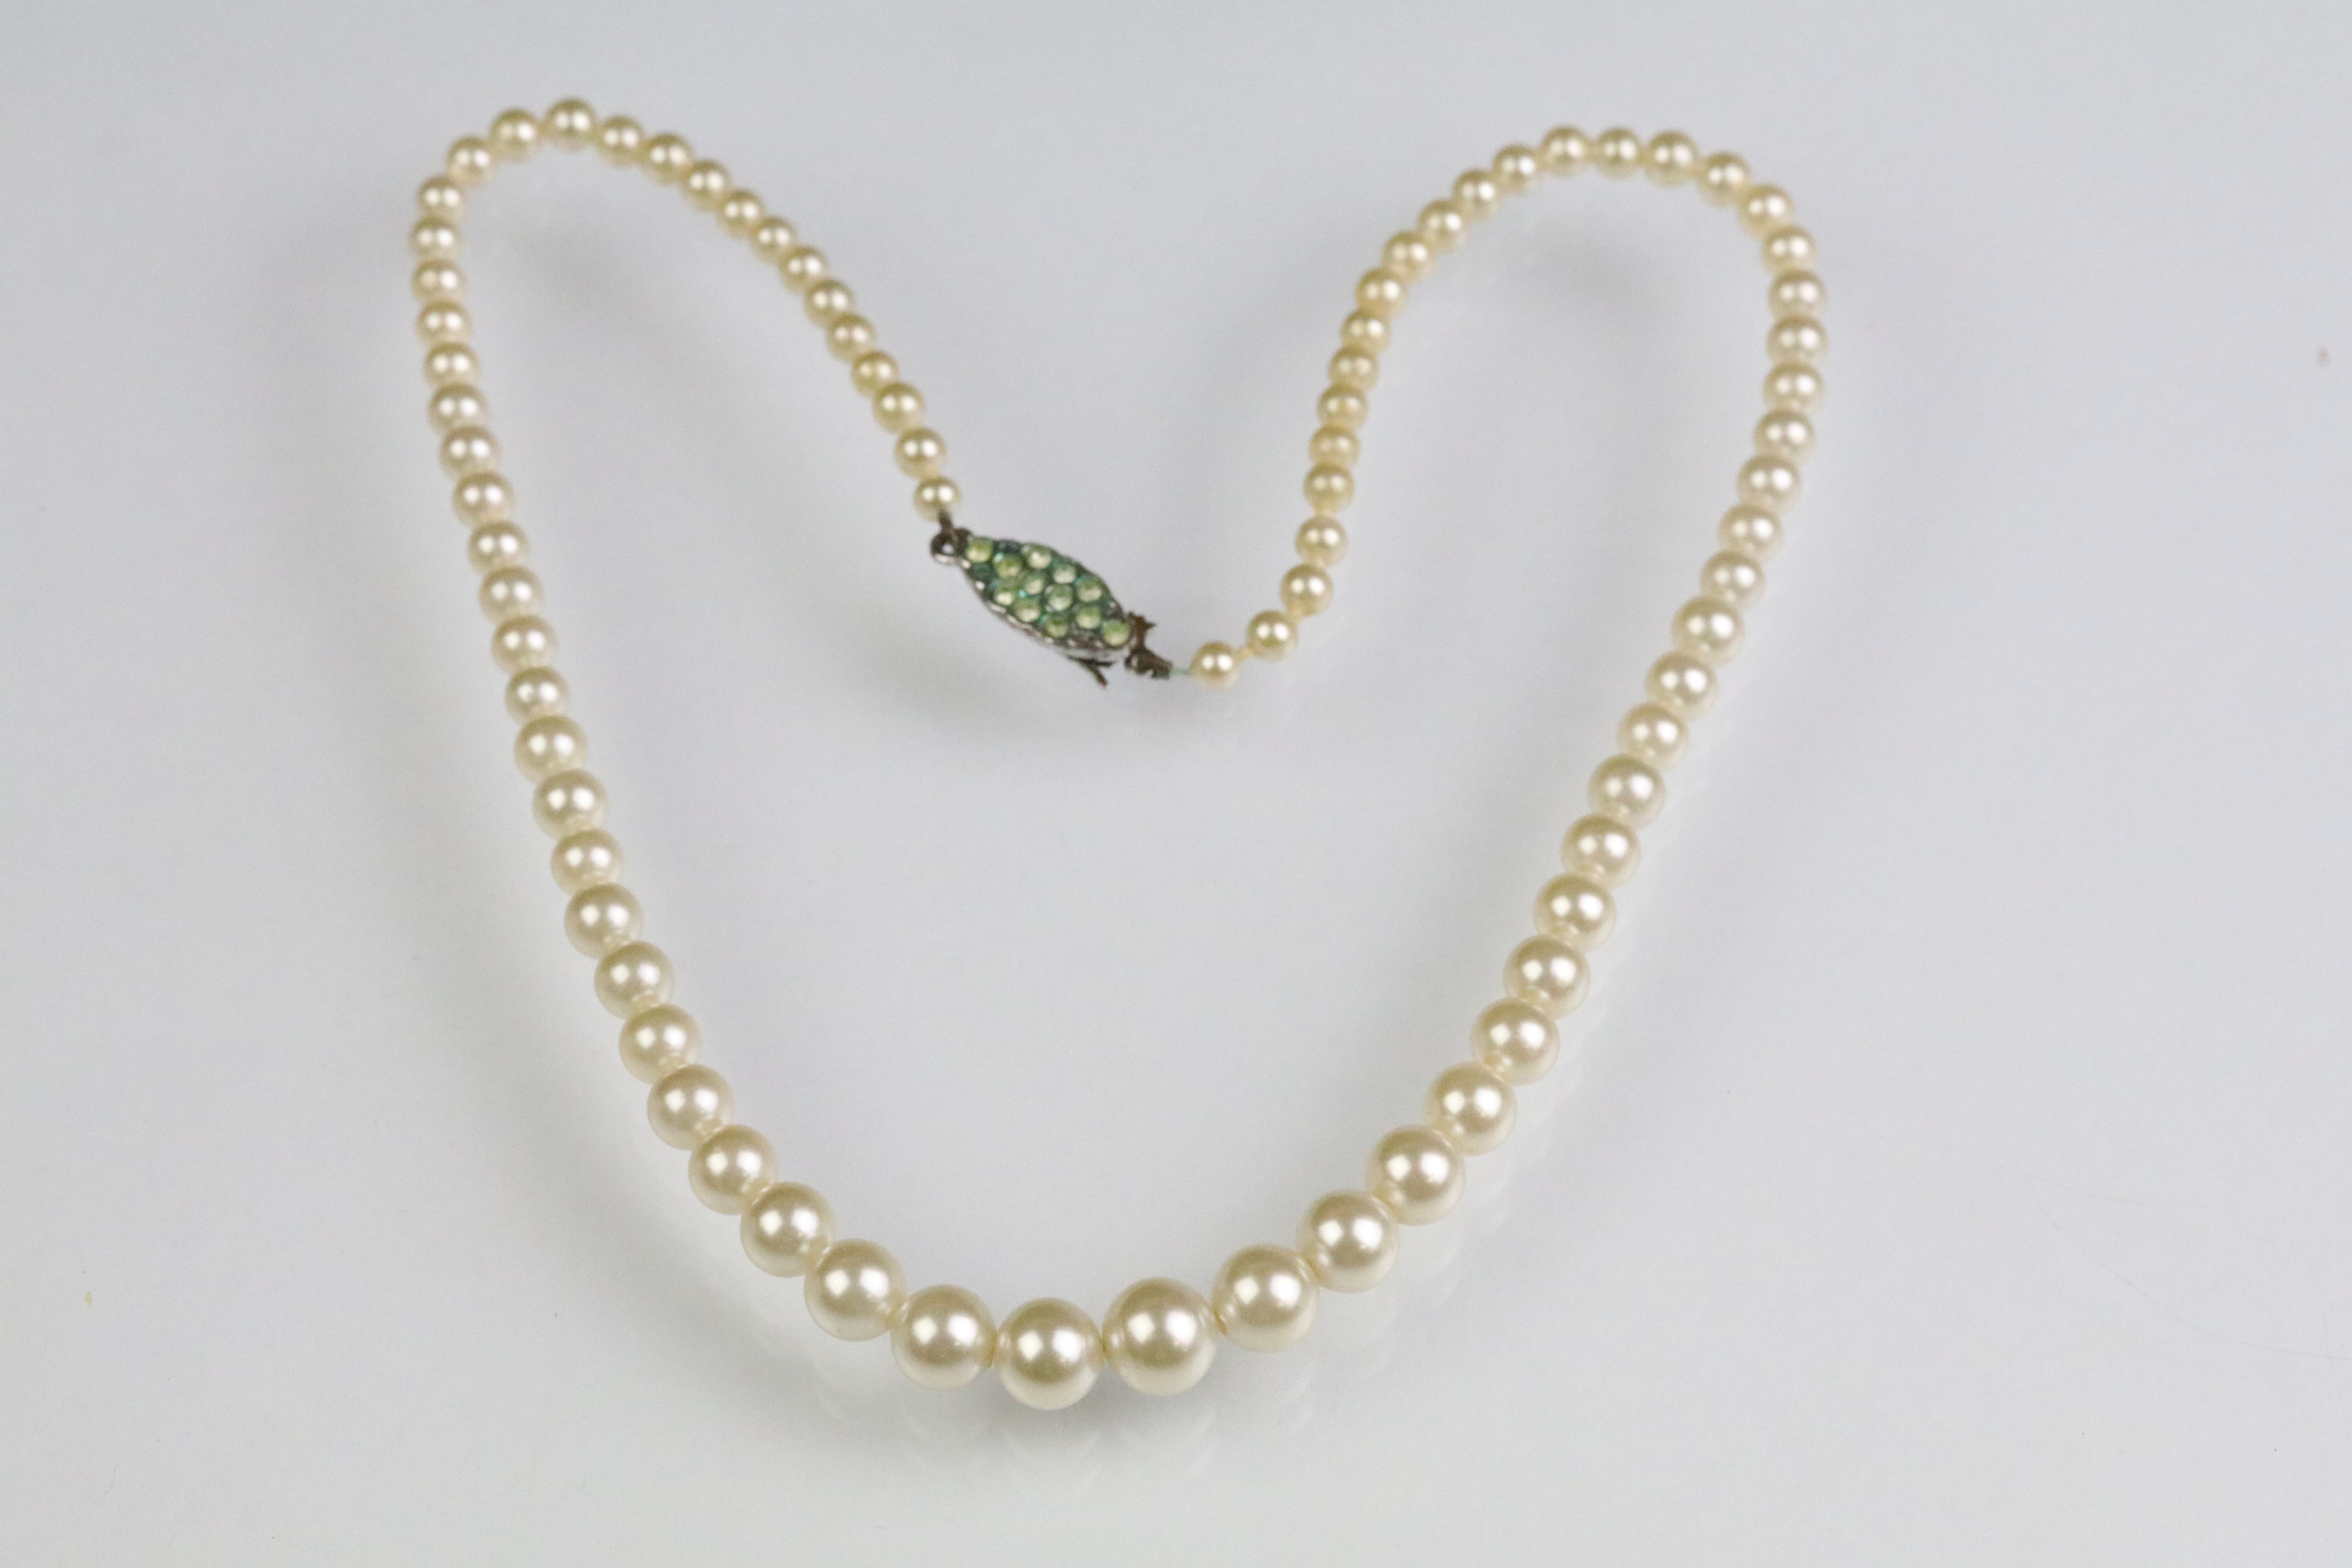 9ct gold figaro chain necklace (AF) together with a rolled gold bangle, ceramic rose brooch, and two - Image 7 of 8